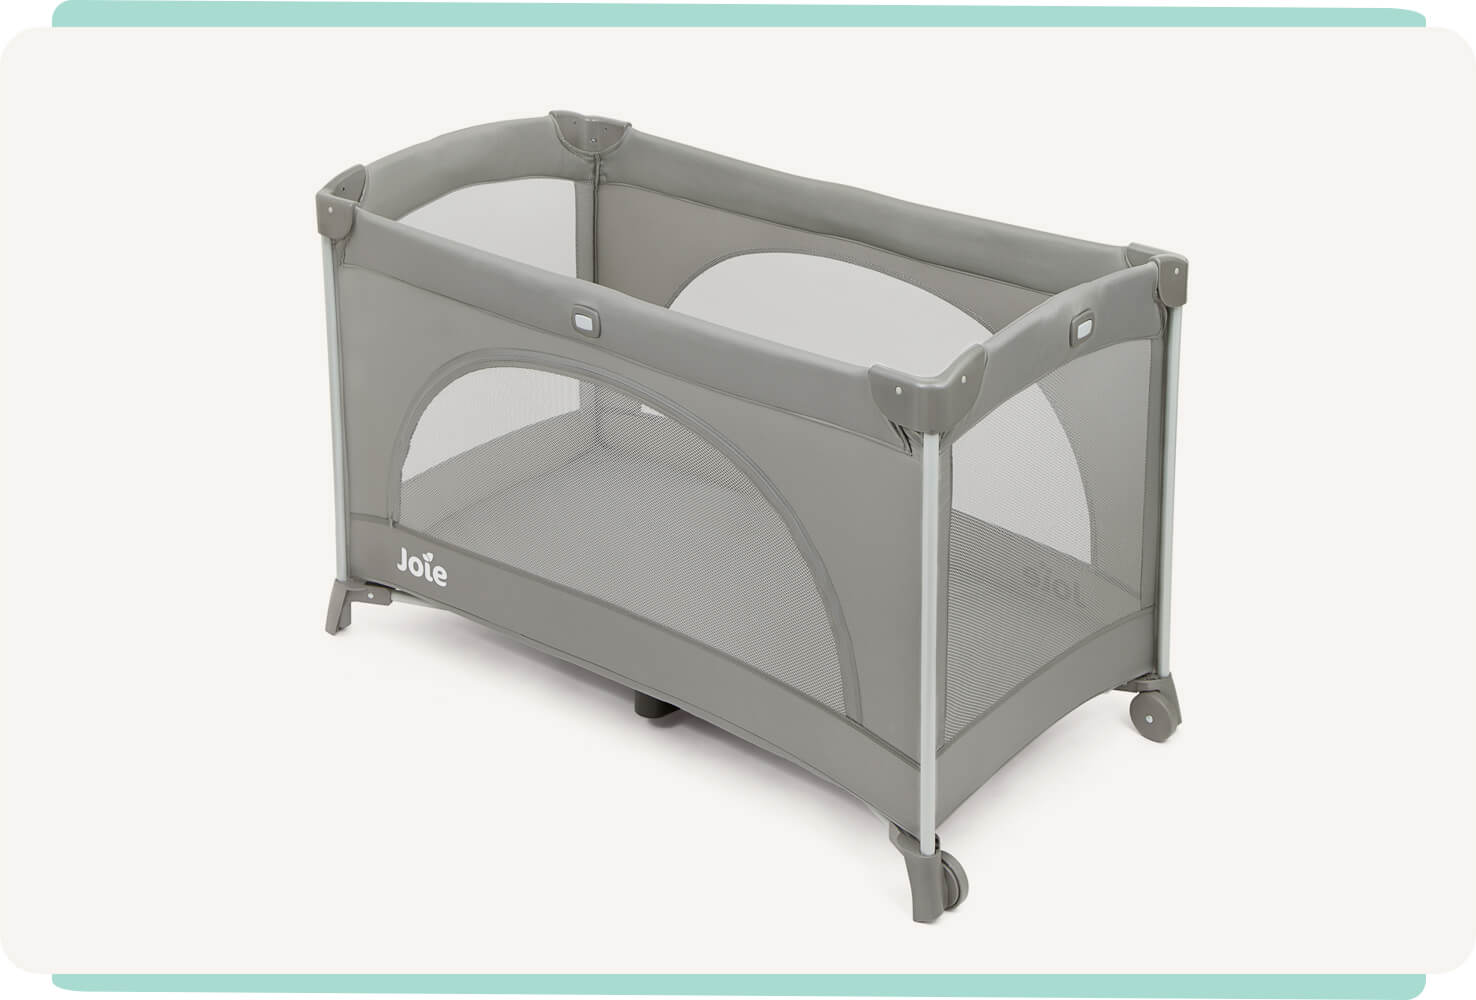 The Joie travel cot allura in grey, pink, and pink flower pattern at a right angle.